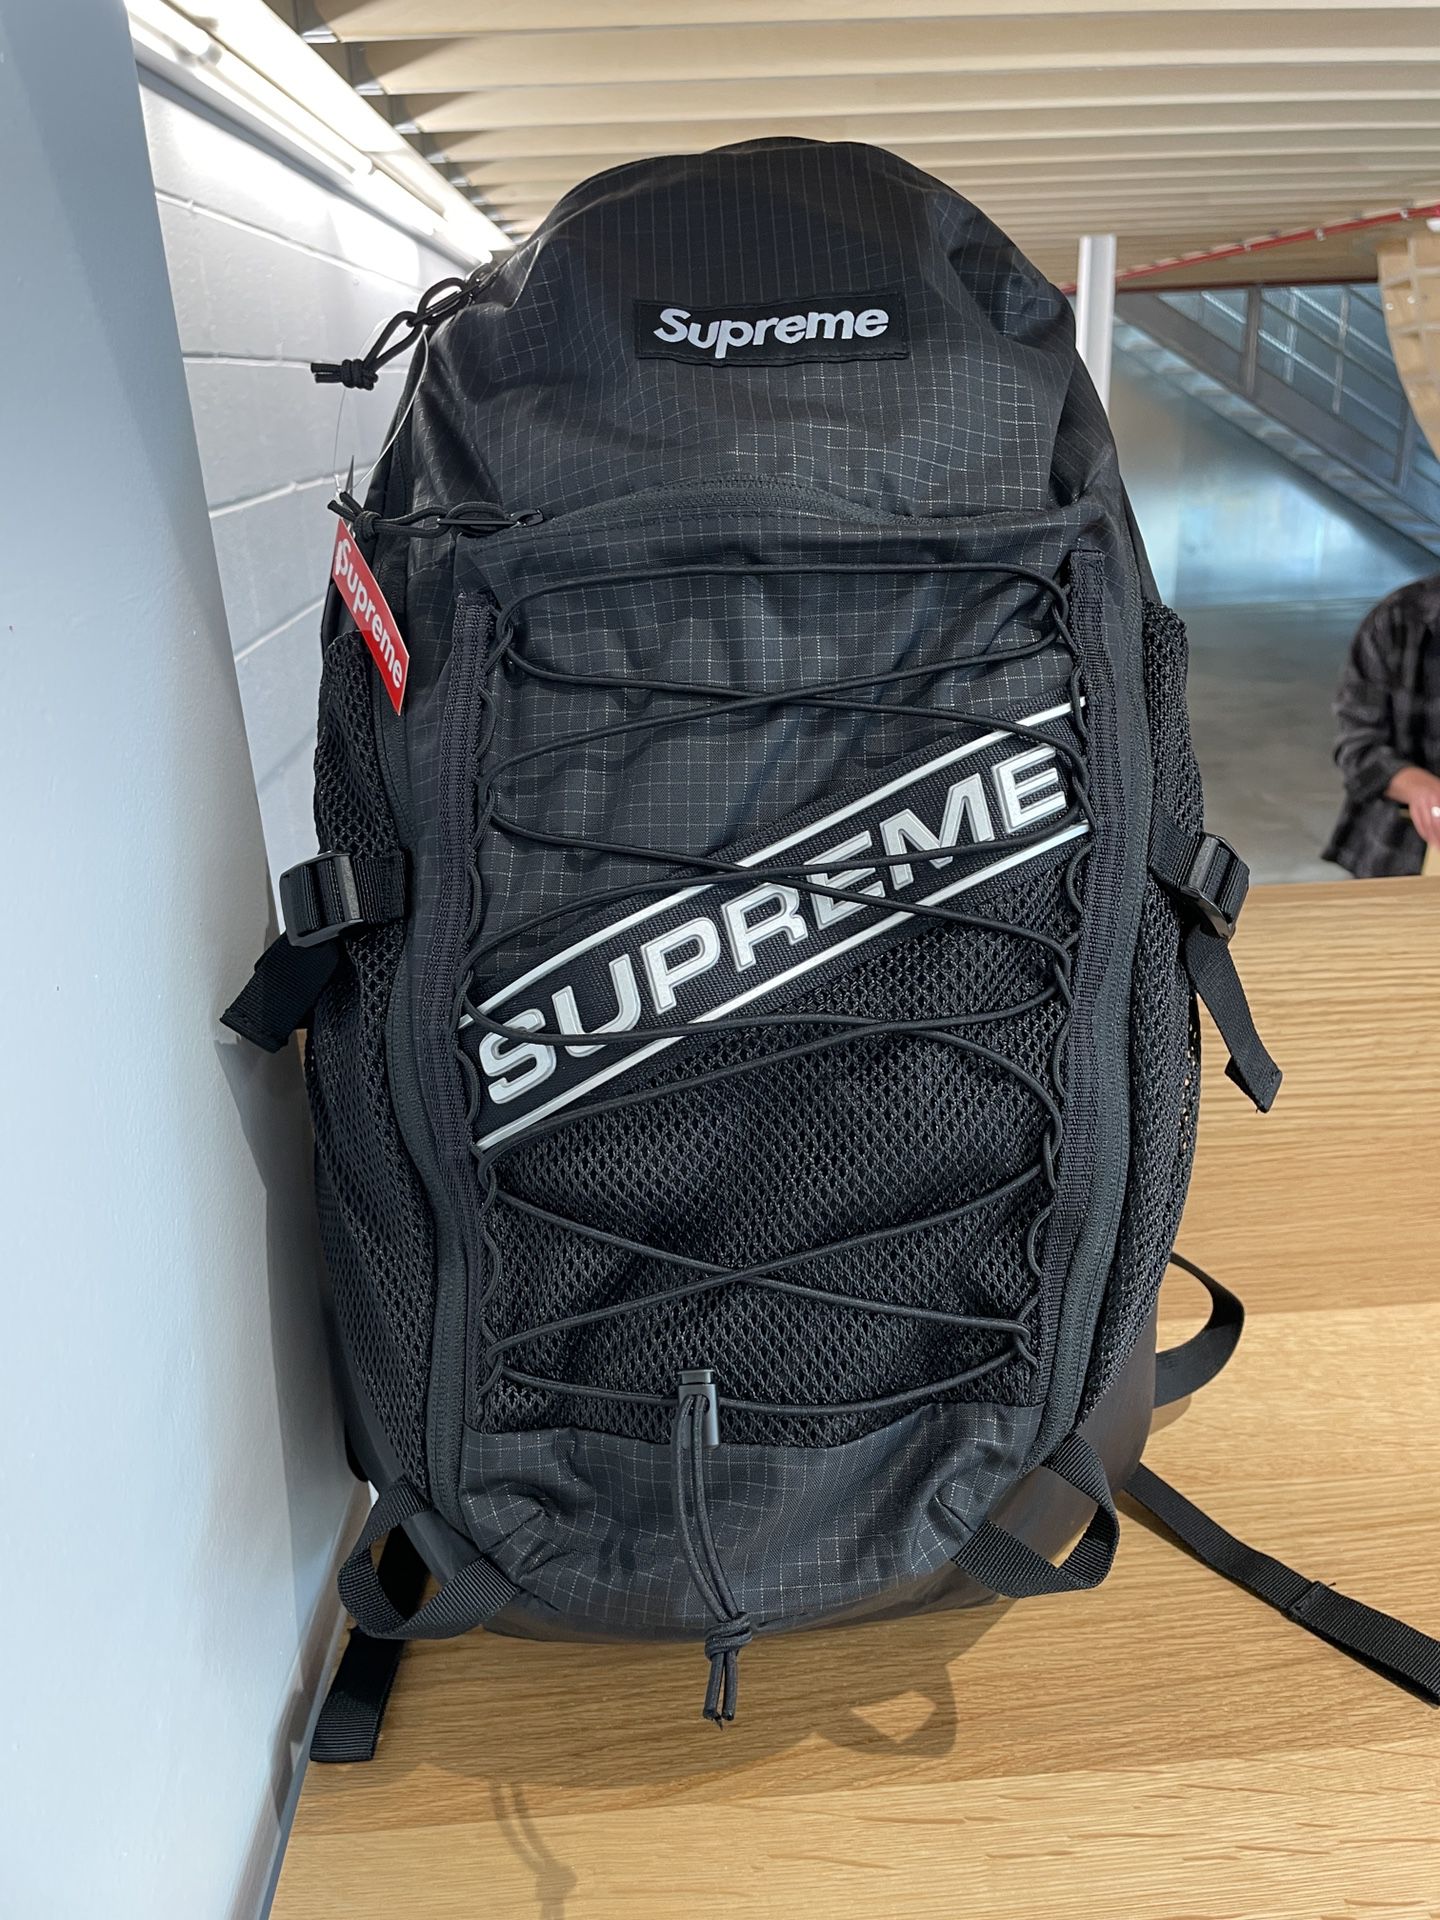 LV Supreme Backpack for Sale in North Hollywood, CA - OfferUp